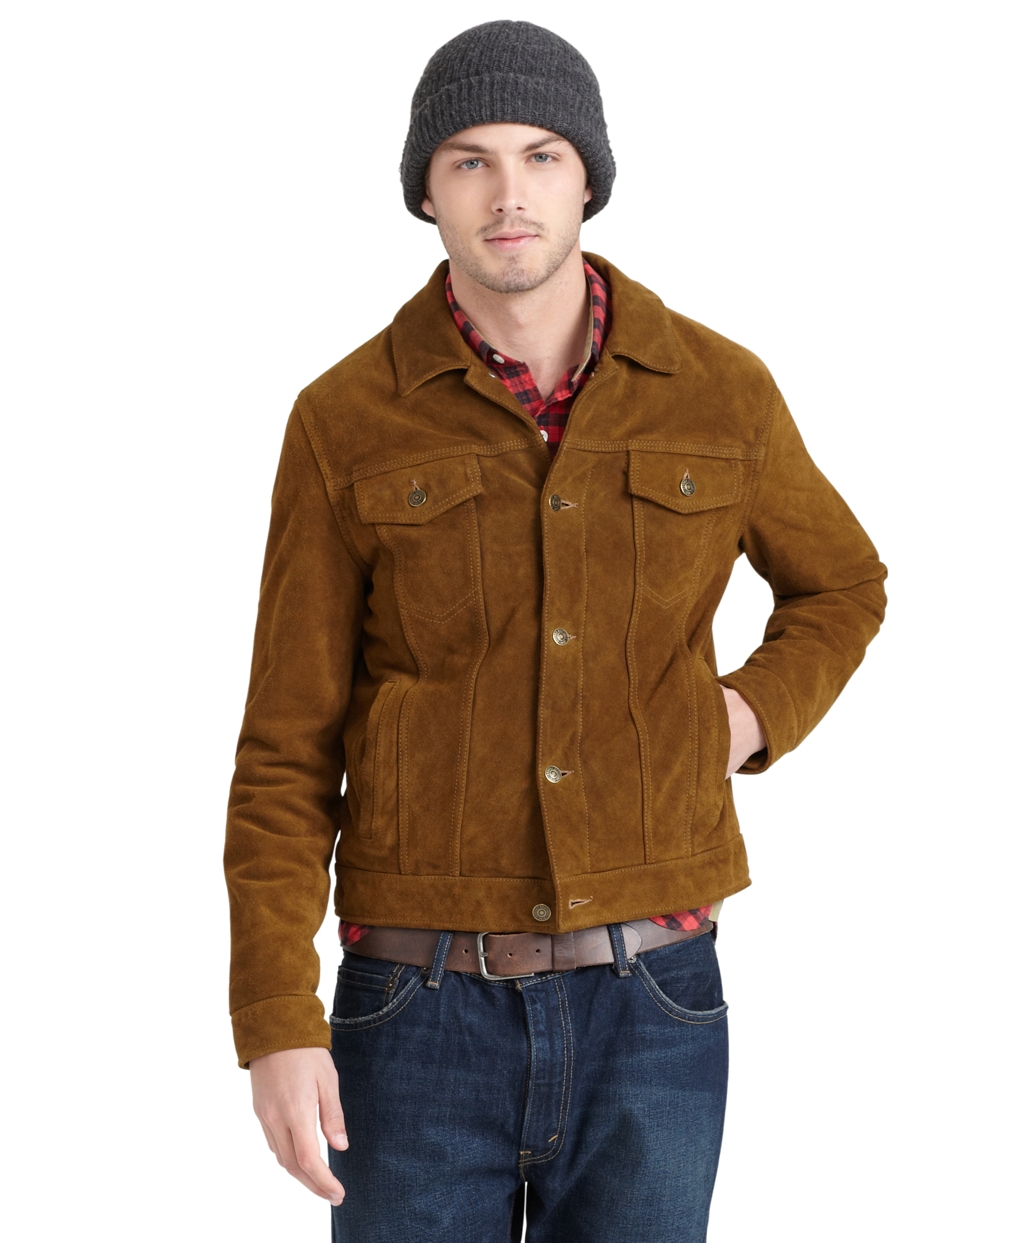 Lyst - Brooks Brothers Suede Jean Jacket in Brown for Men